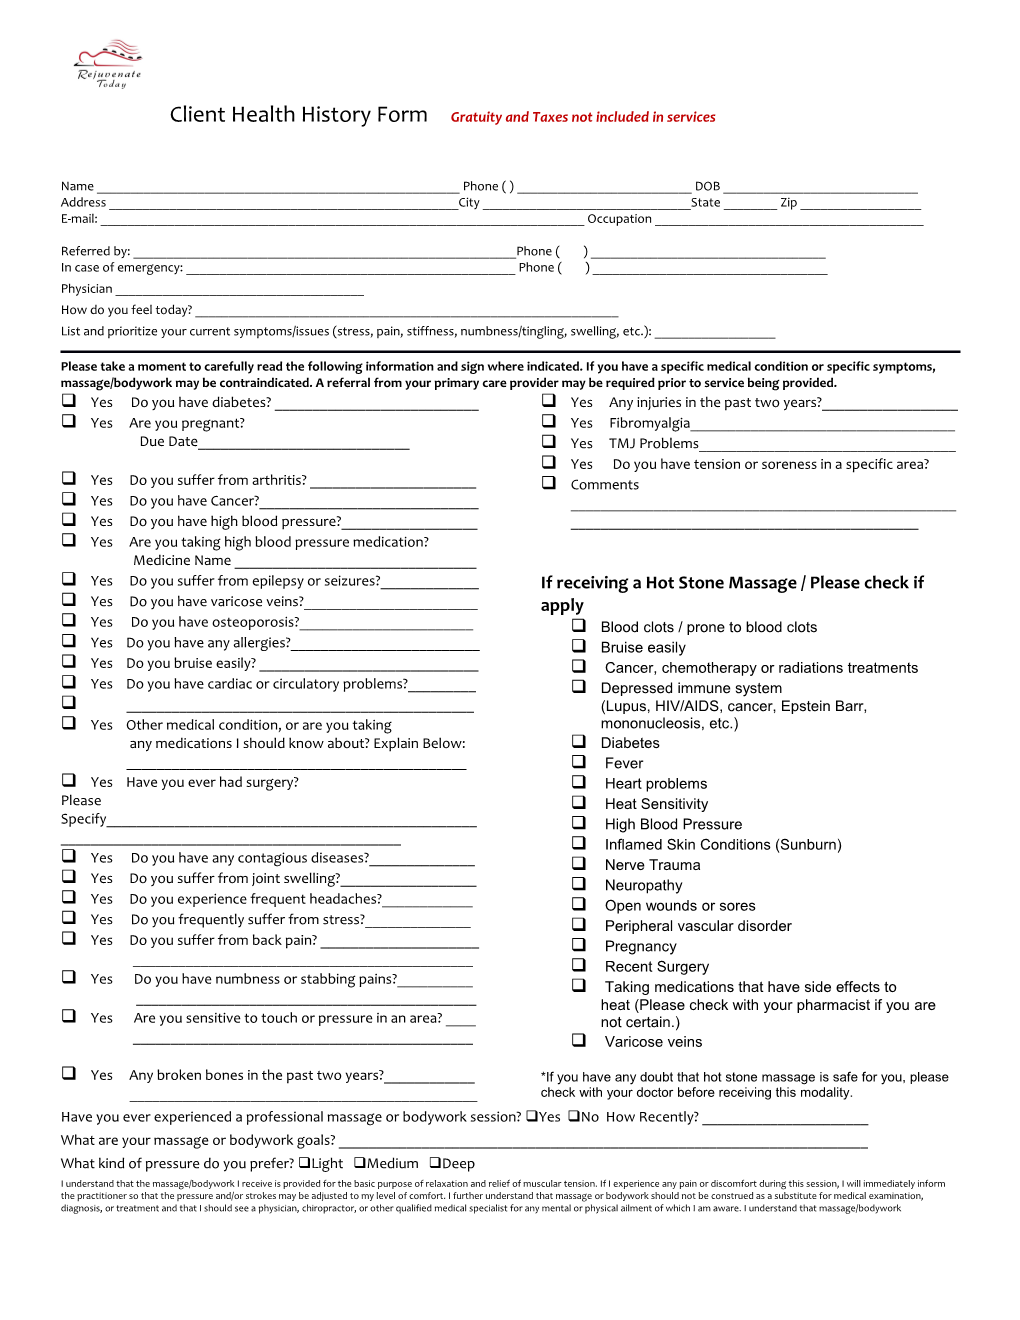 Client Health History Form Gratuity and Taxes Not Included in Services